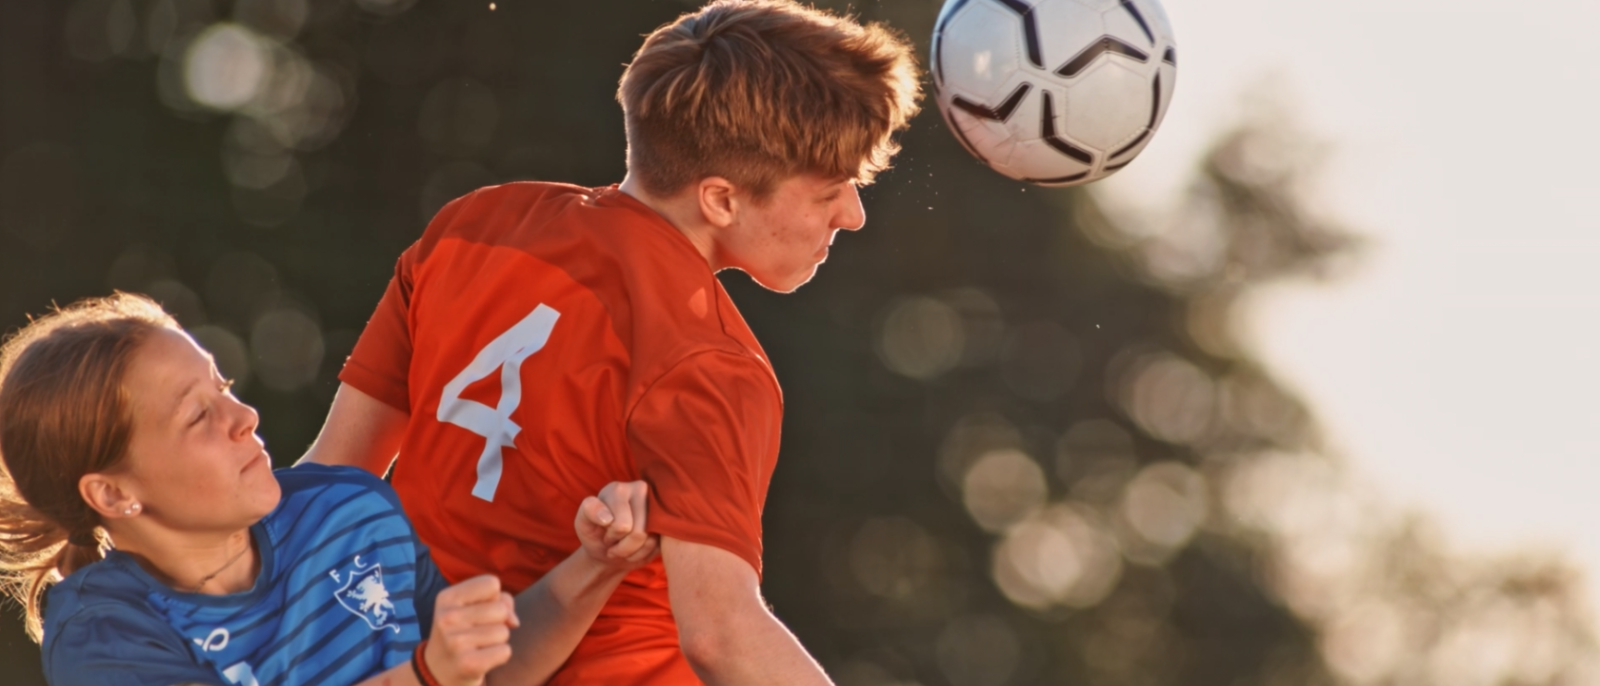 Soccer Heading Linked to Measurable Decline of Brain Structure and Function Over Two Years